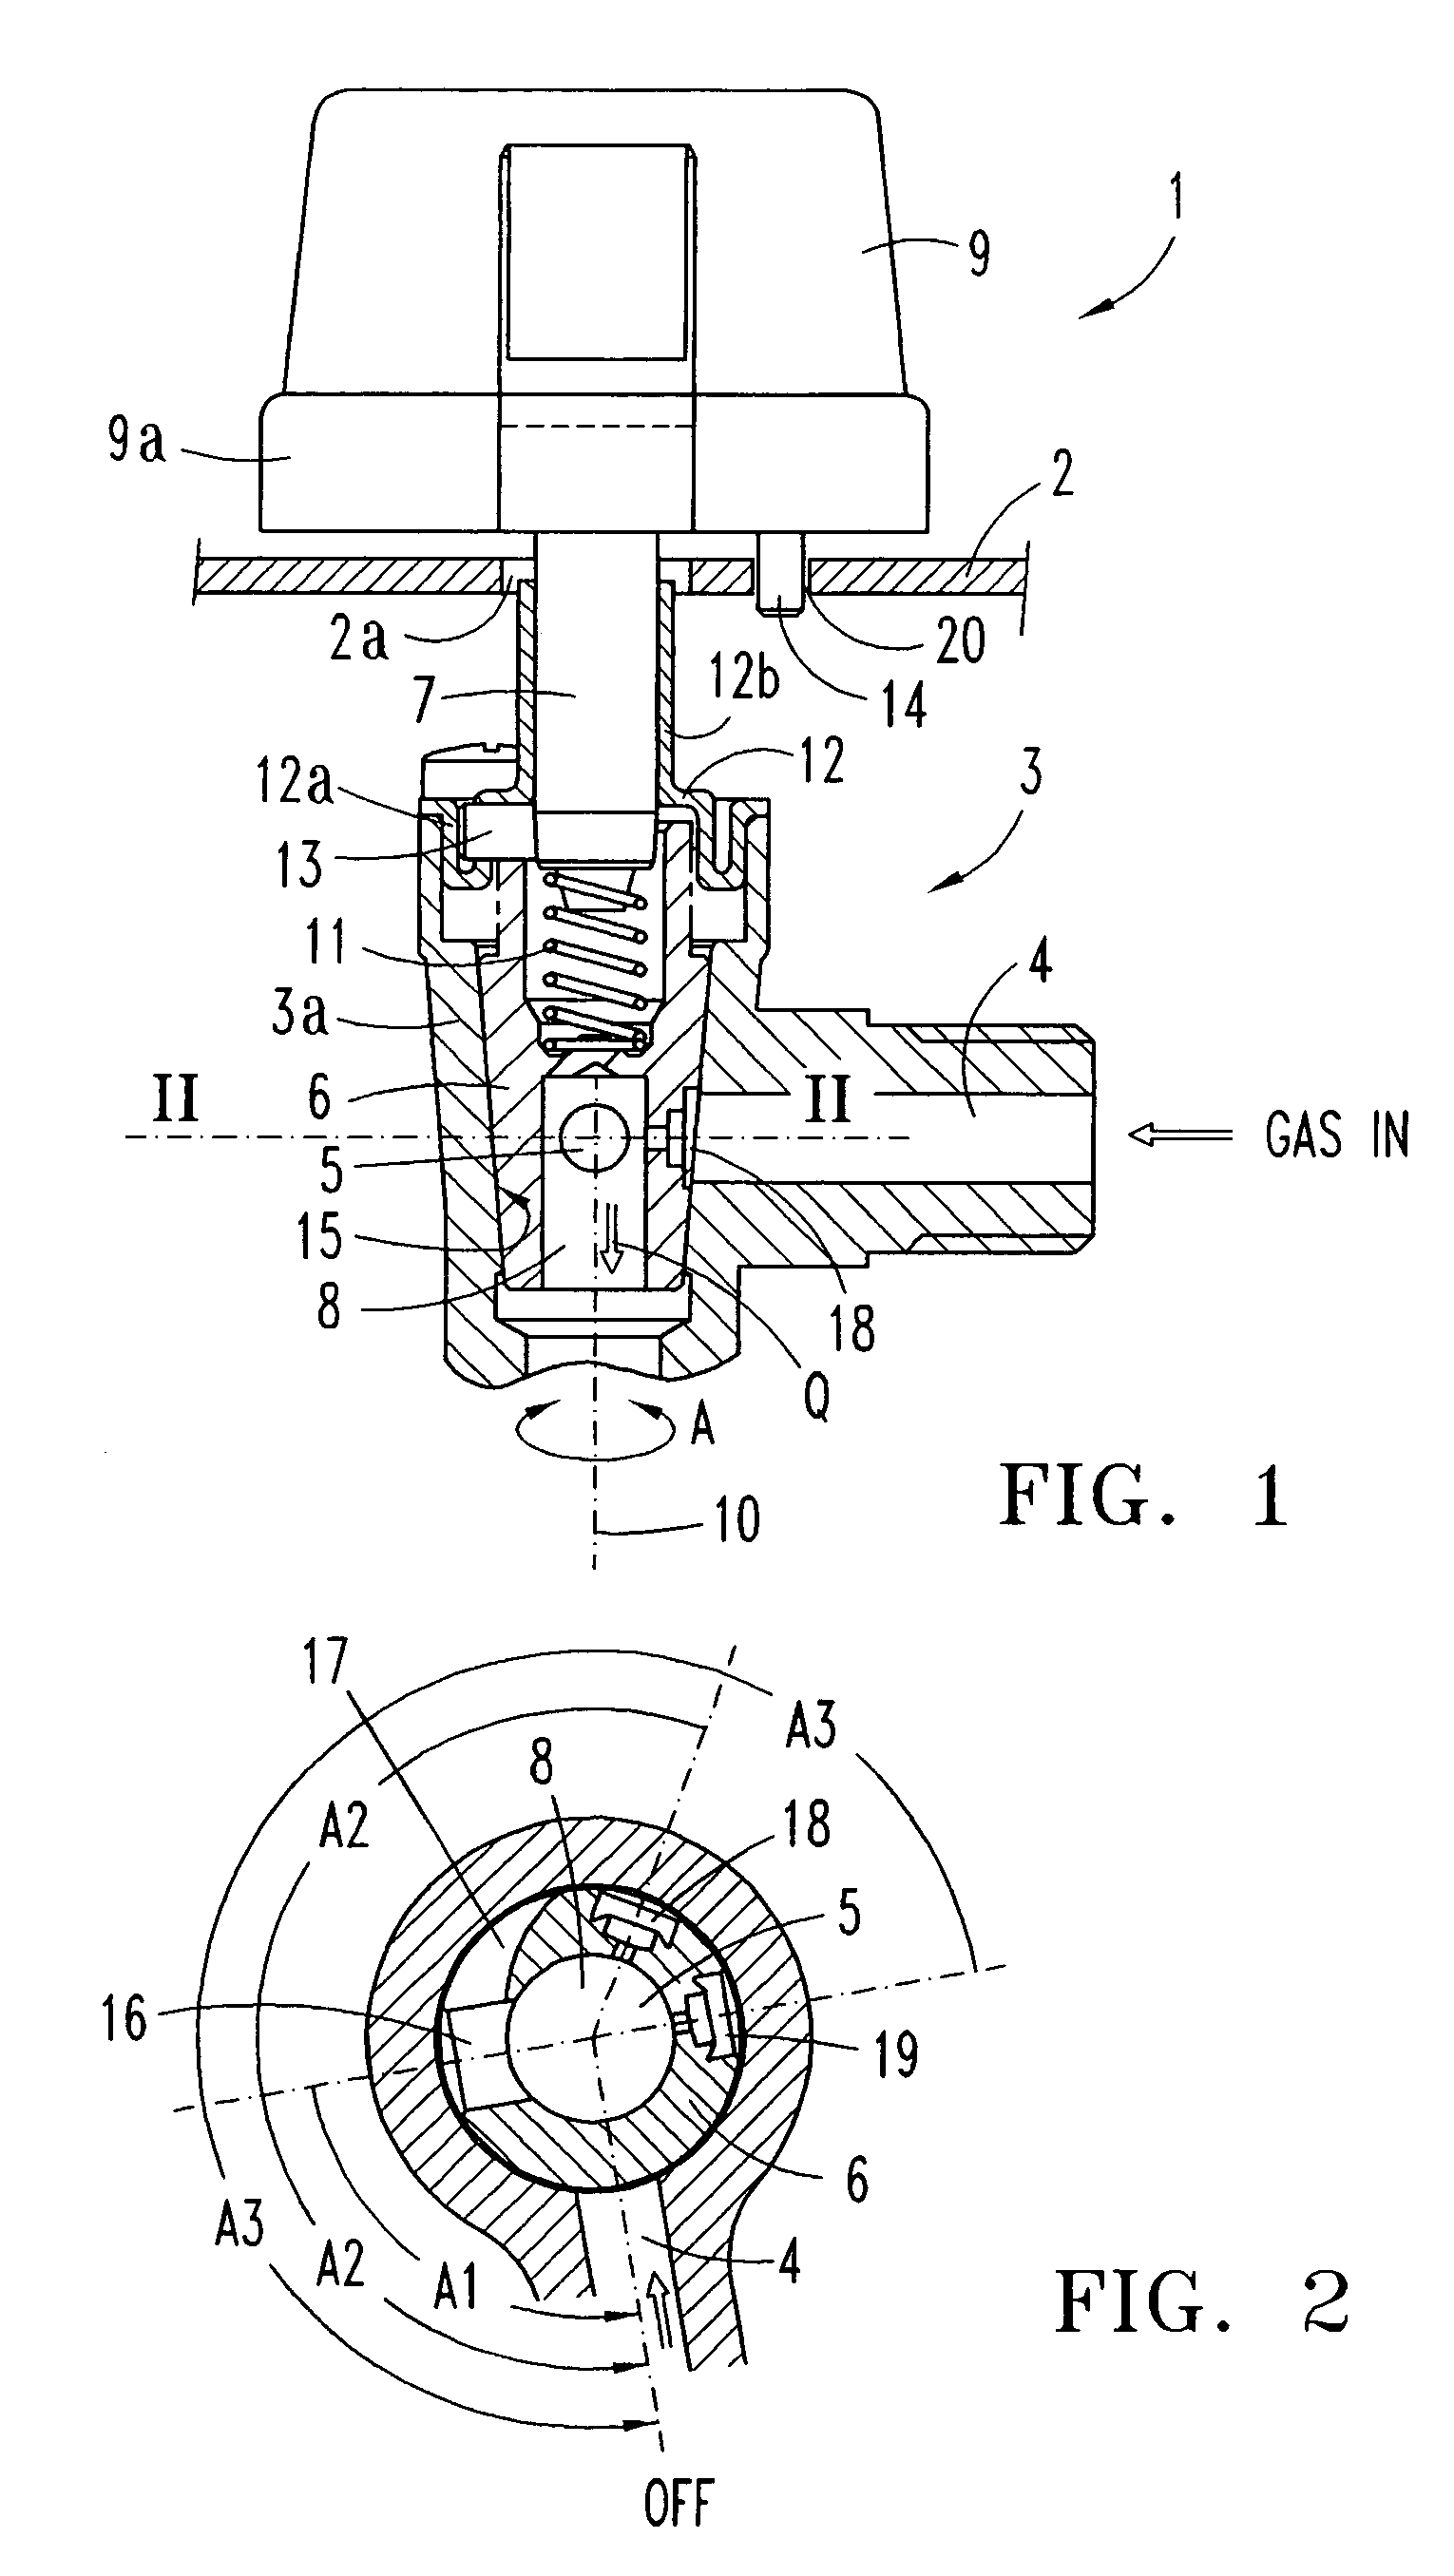 Rotary valve in a multi-gas cooker